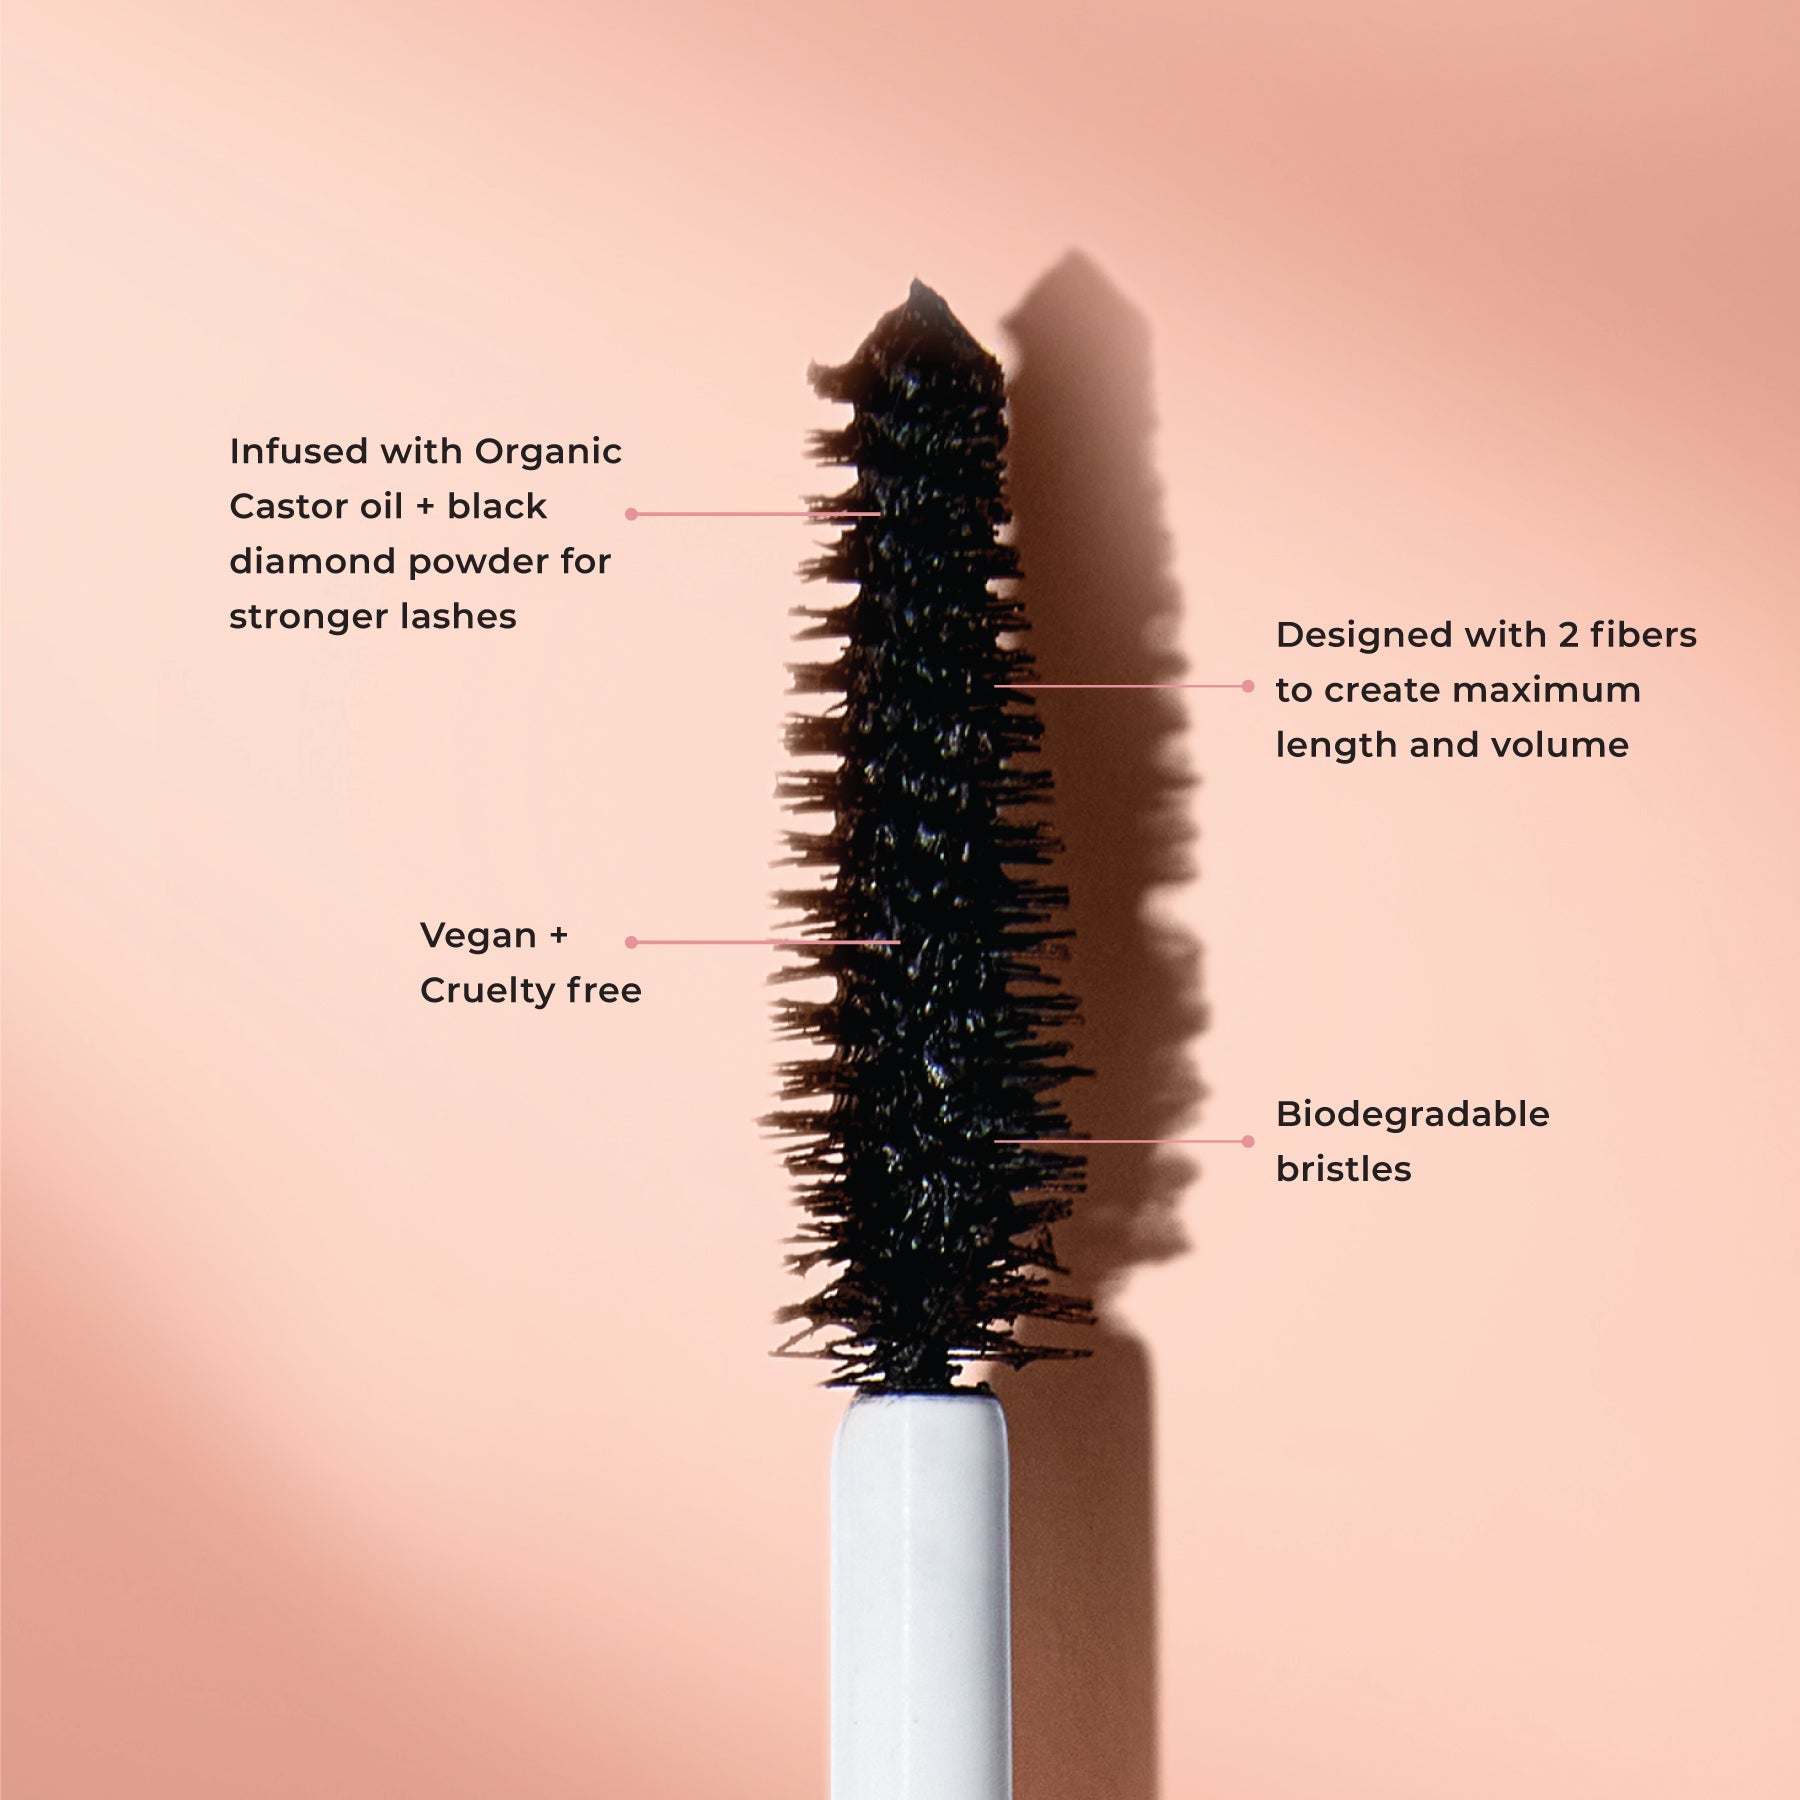 Infused with Organic Castor Oil and Black Diamond Powder for stronger lashes; Designed with 2 fibres to create maximum length and volume; Vegan + Cruelty-Free; Biodegradable bristles